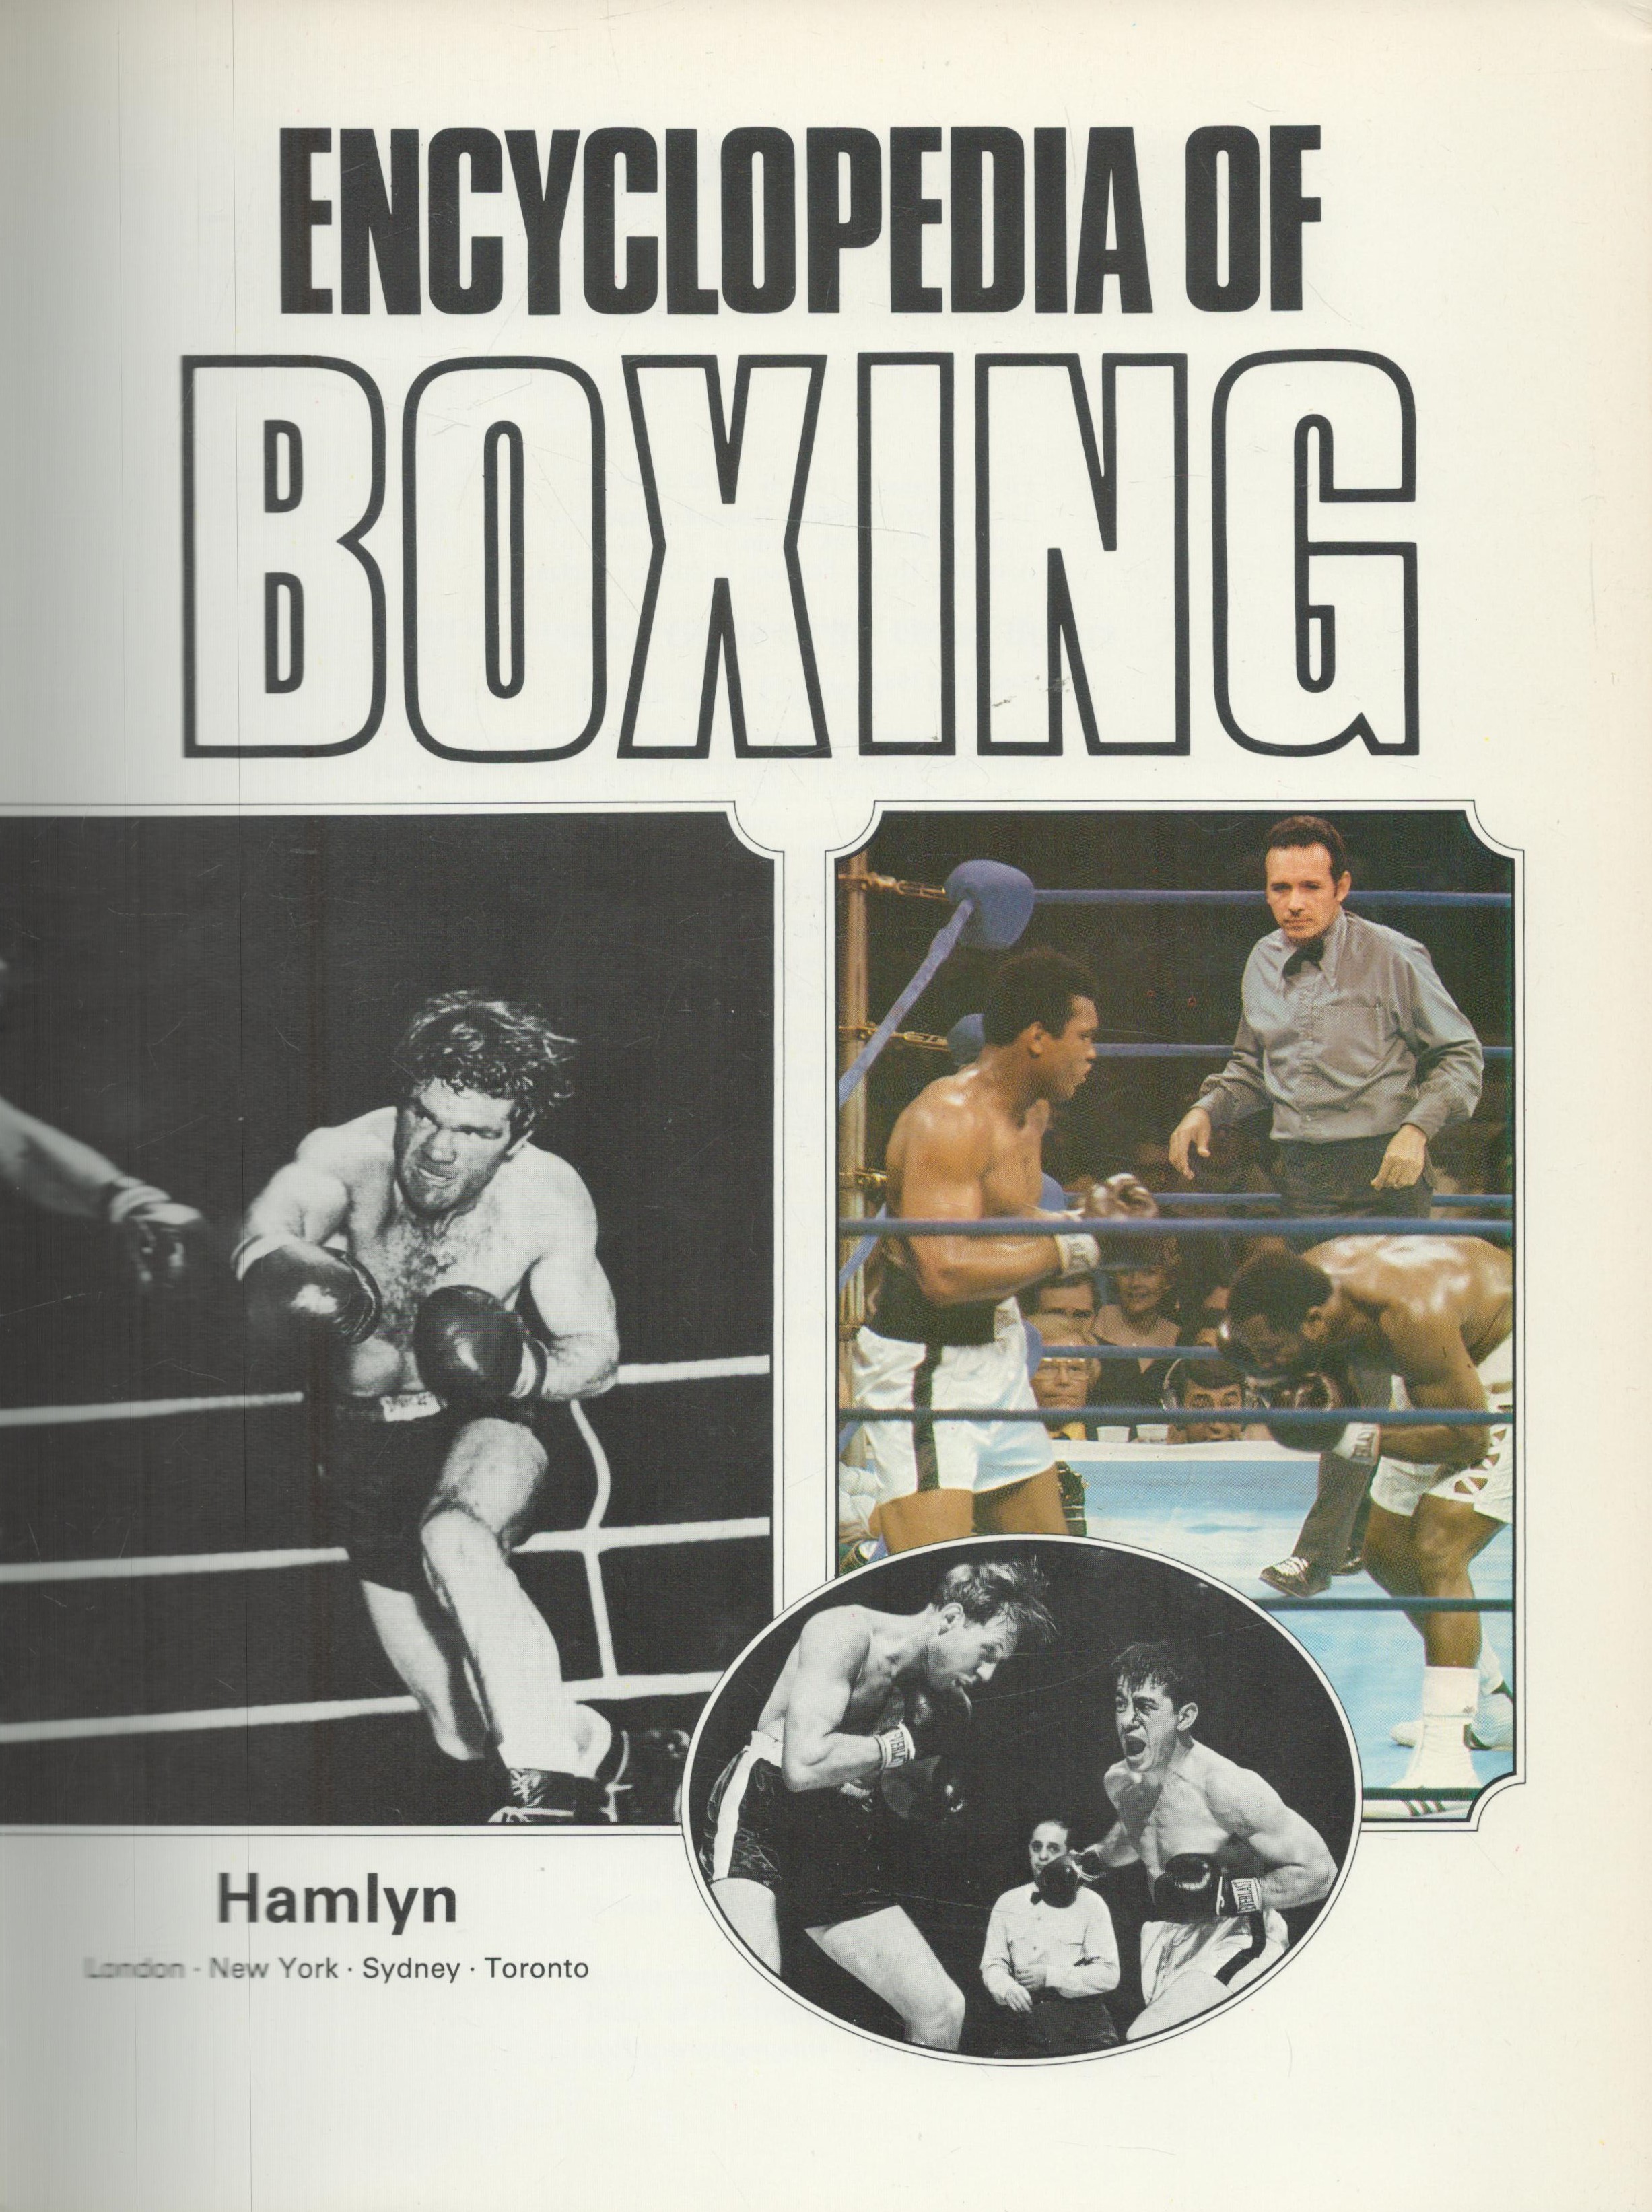 Encyclopaedia of Boxing by Gilbert Odd Hardback book, 192 pages. Good Condition. All autographs come - Image 2 of 3